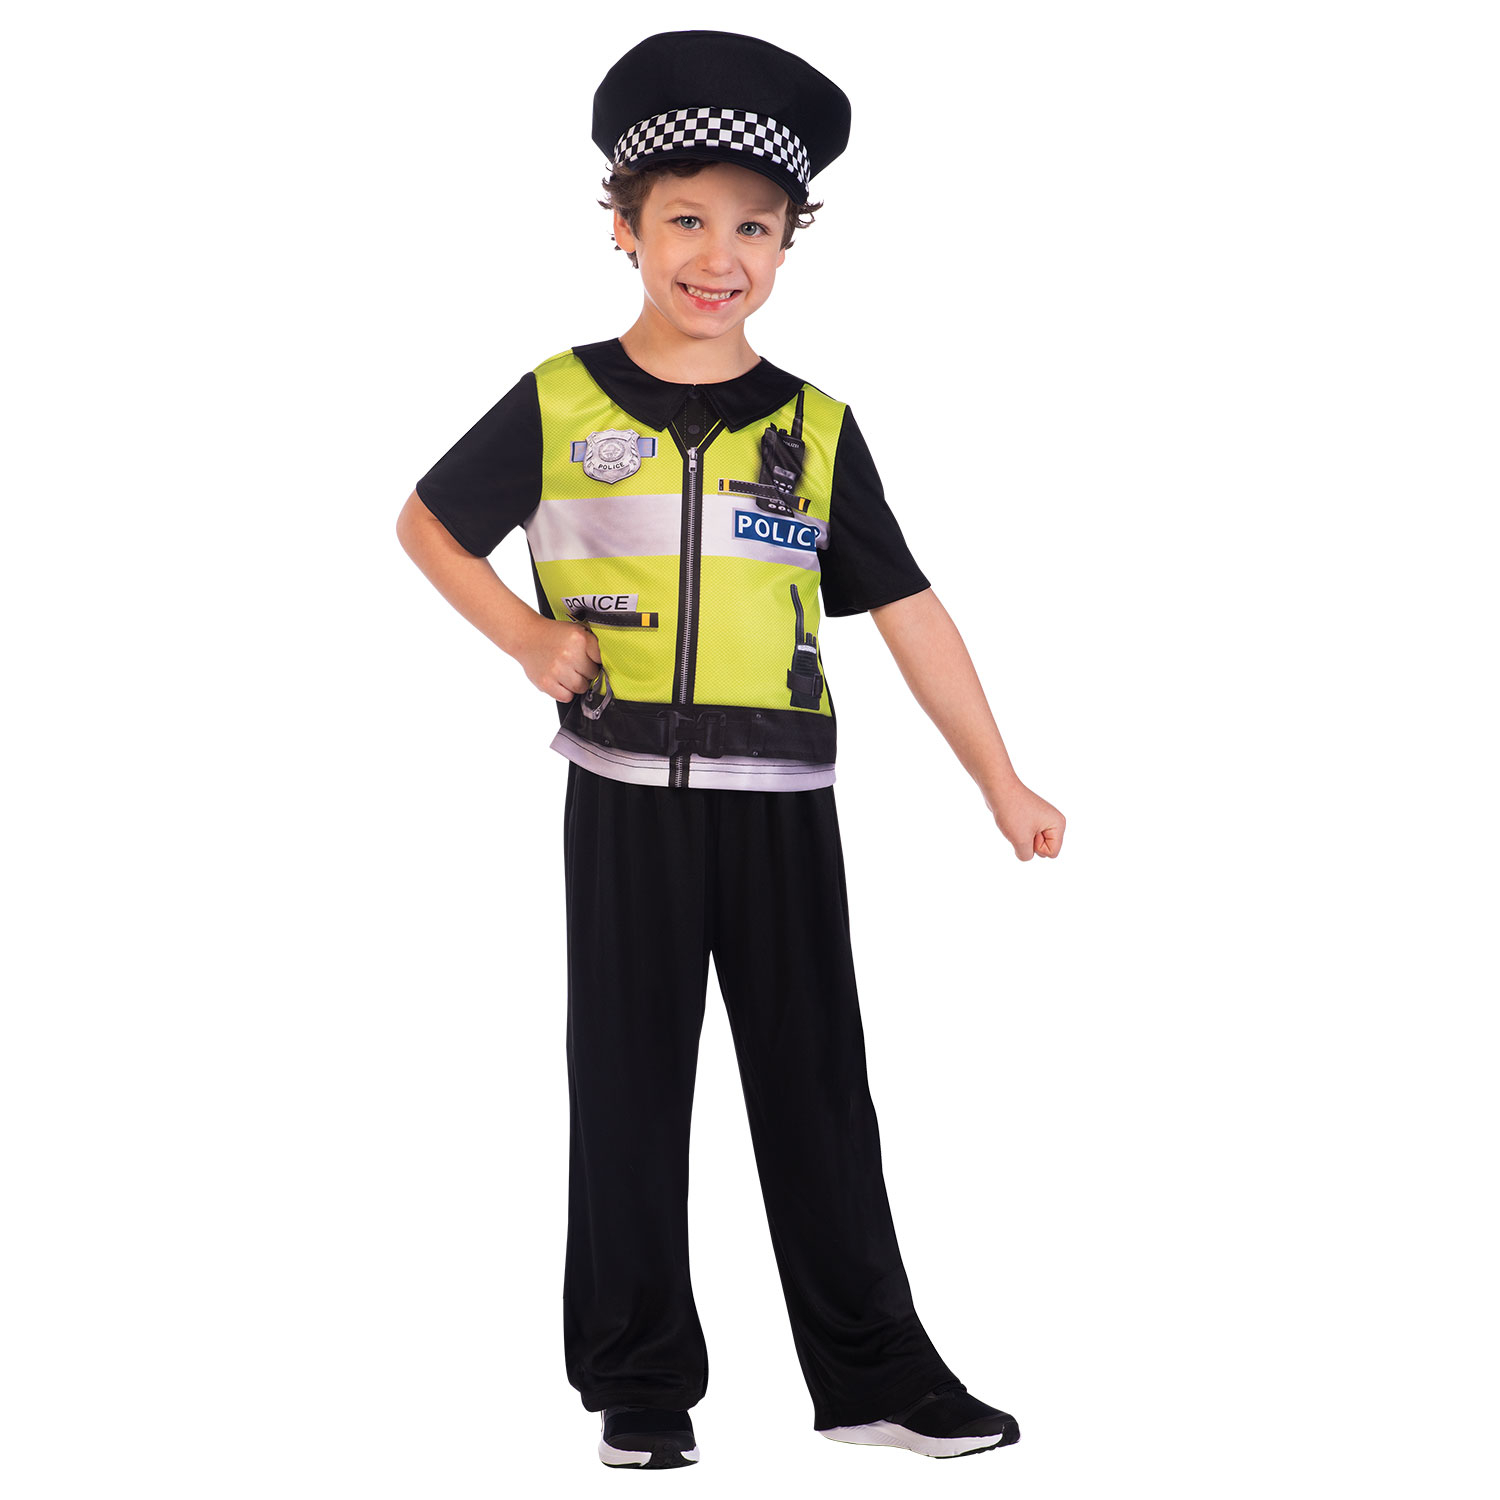 Police Officer Sustainable Costume - Age 6-8 Years - 1 PC : Amscan